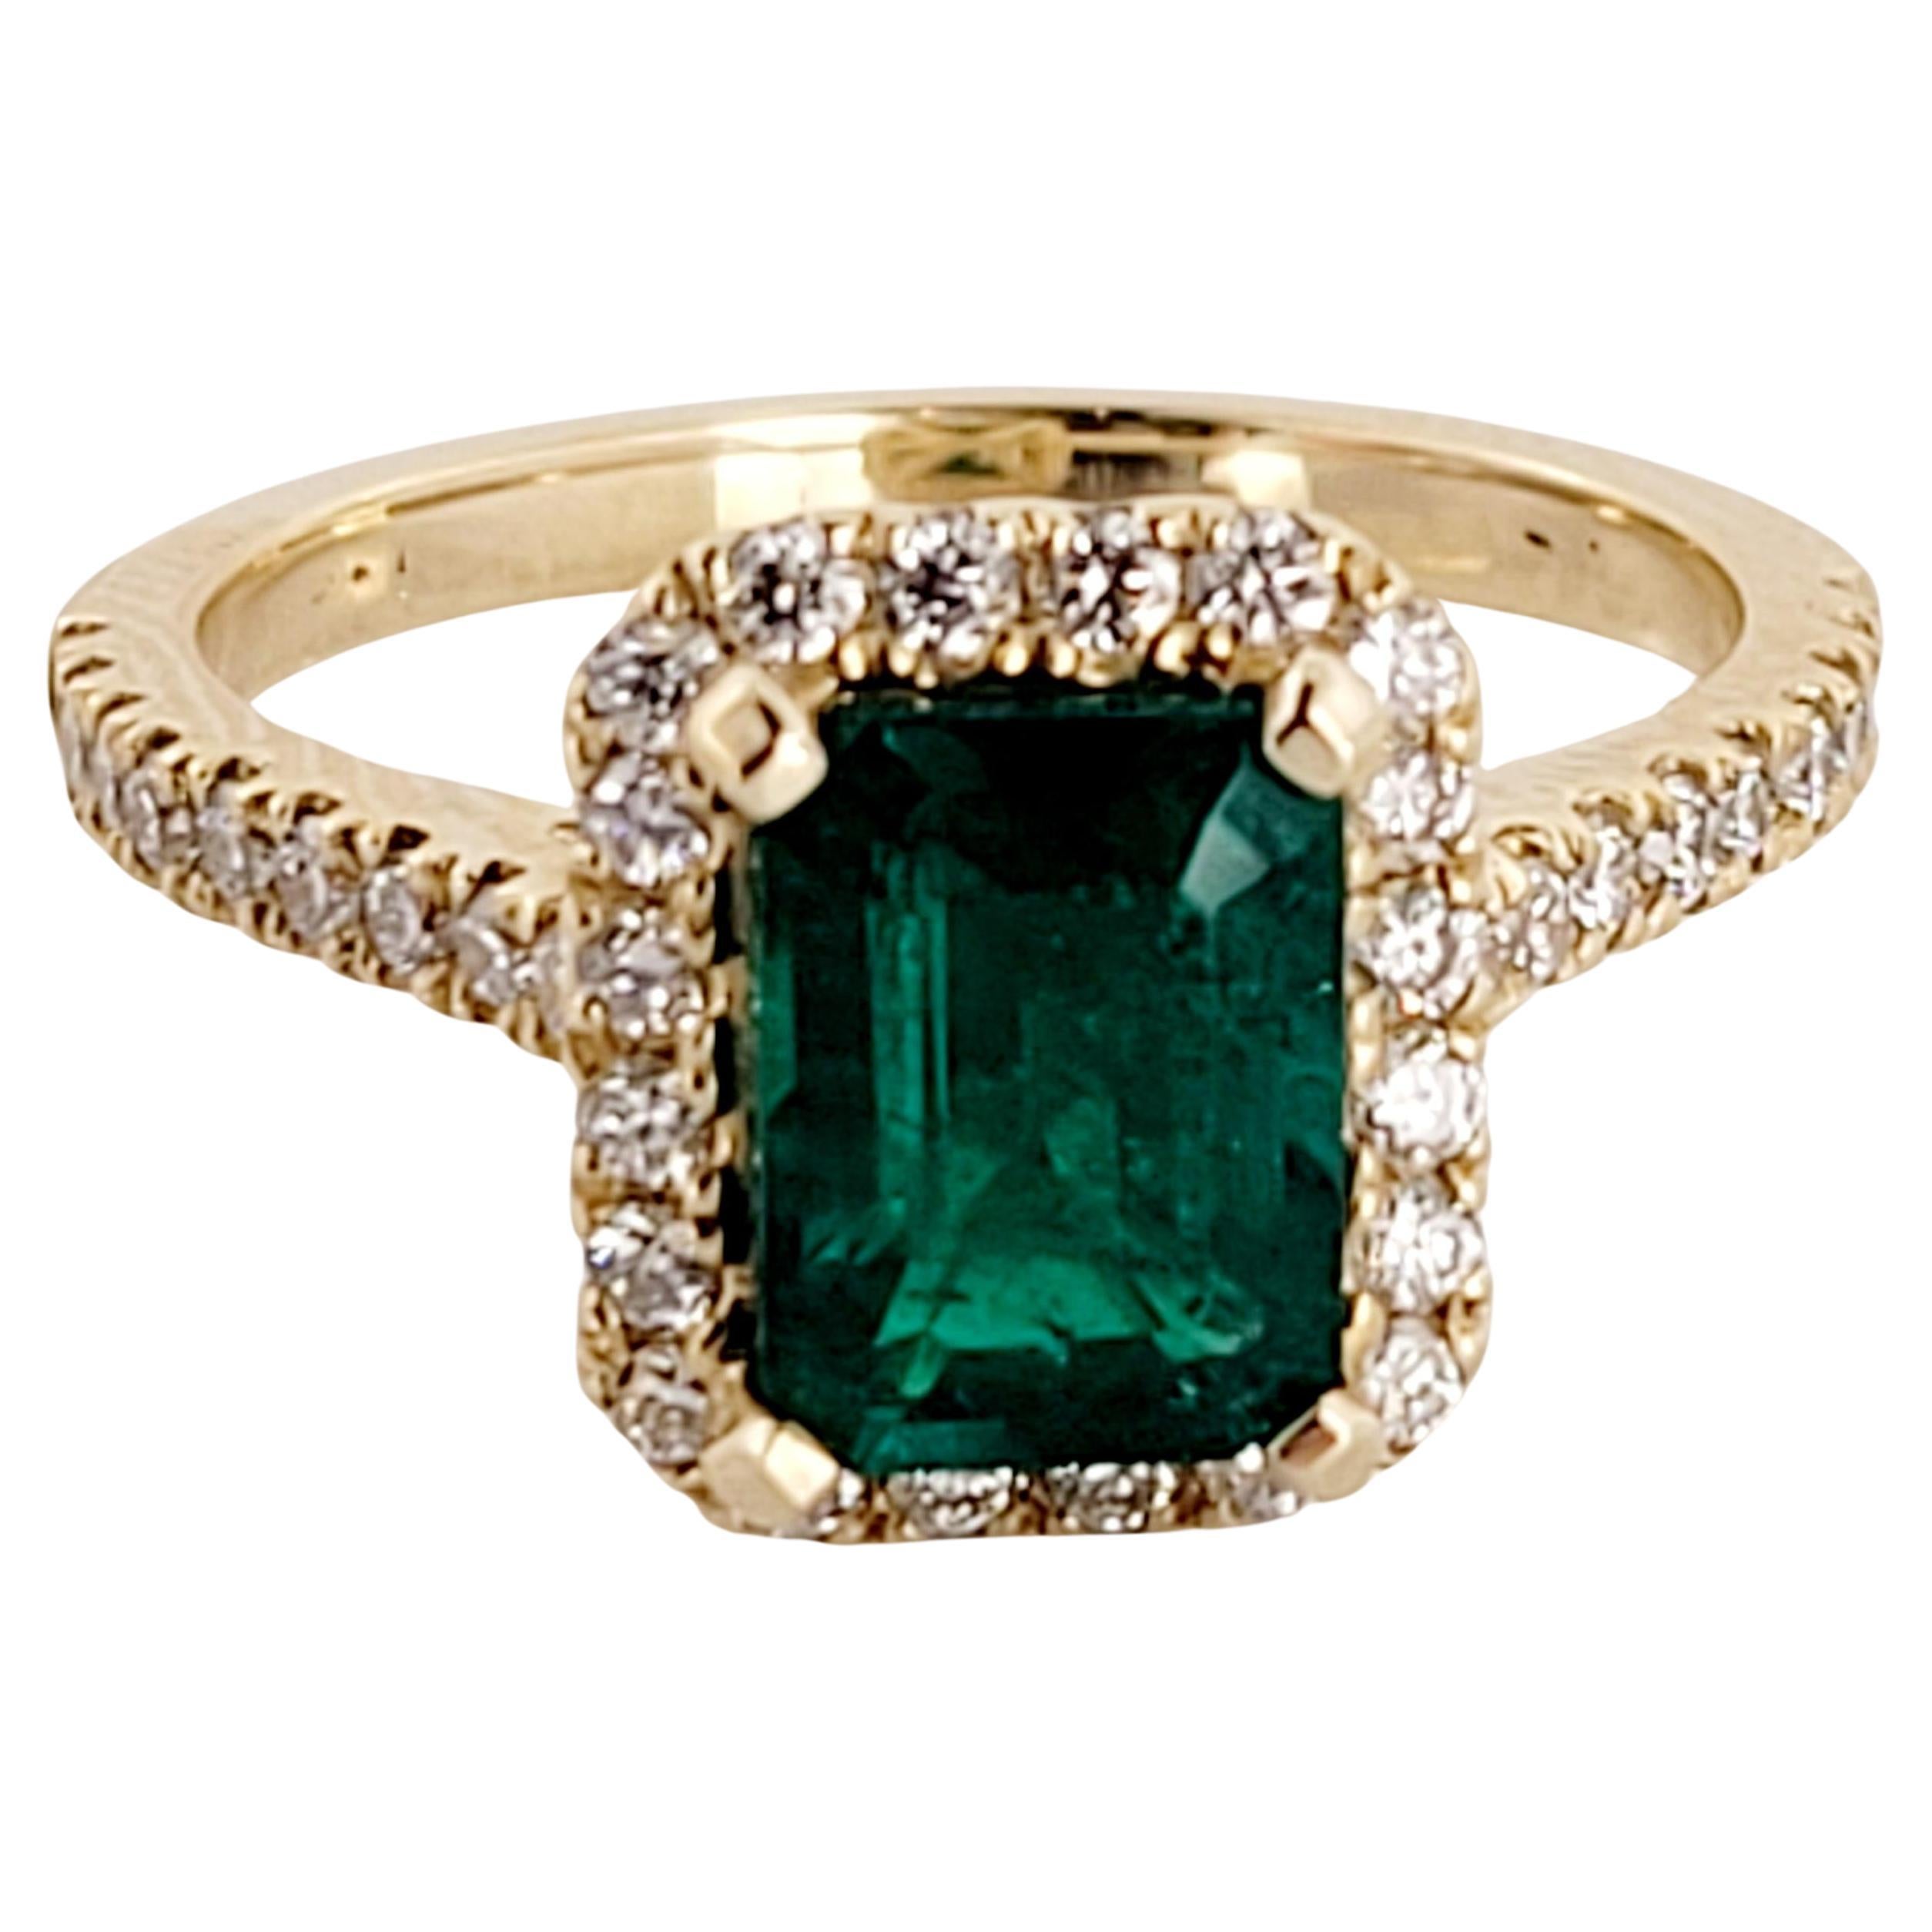 Emerald Cut Emerald Ring with White Diamond and 14K Yellow Gold en vente